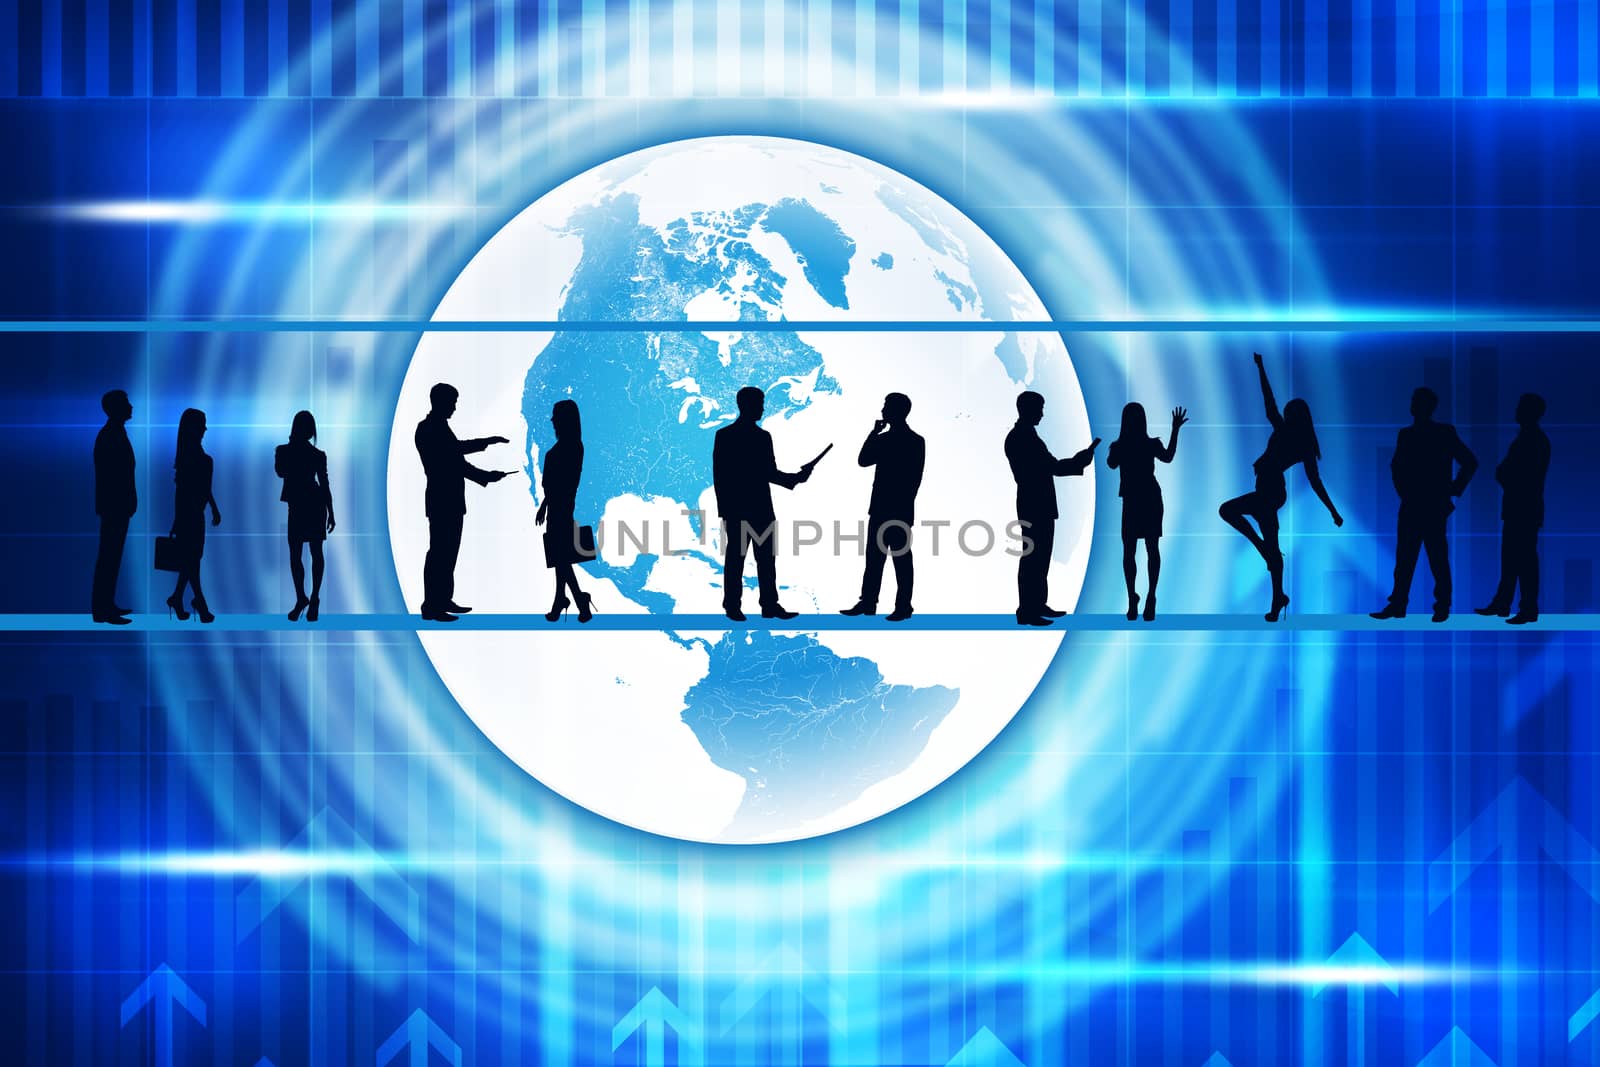 Silhouettes of business people in different postures on abstract blue background with earth and arrows. Elements of this image furnished by NASA